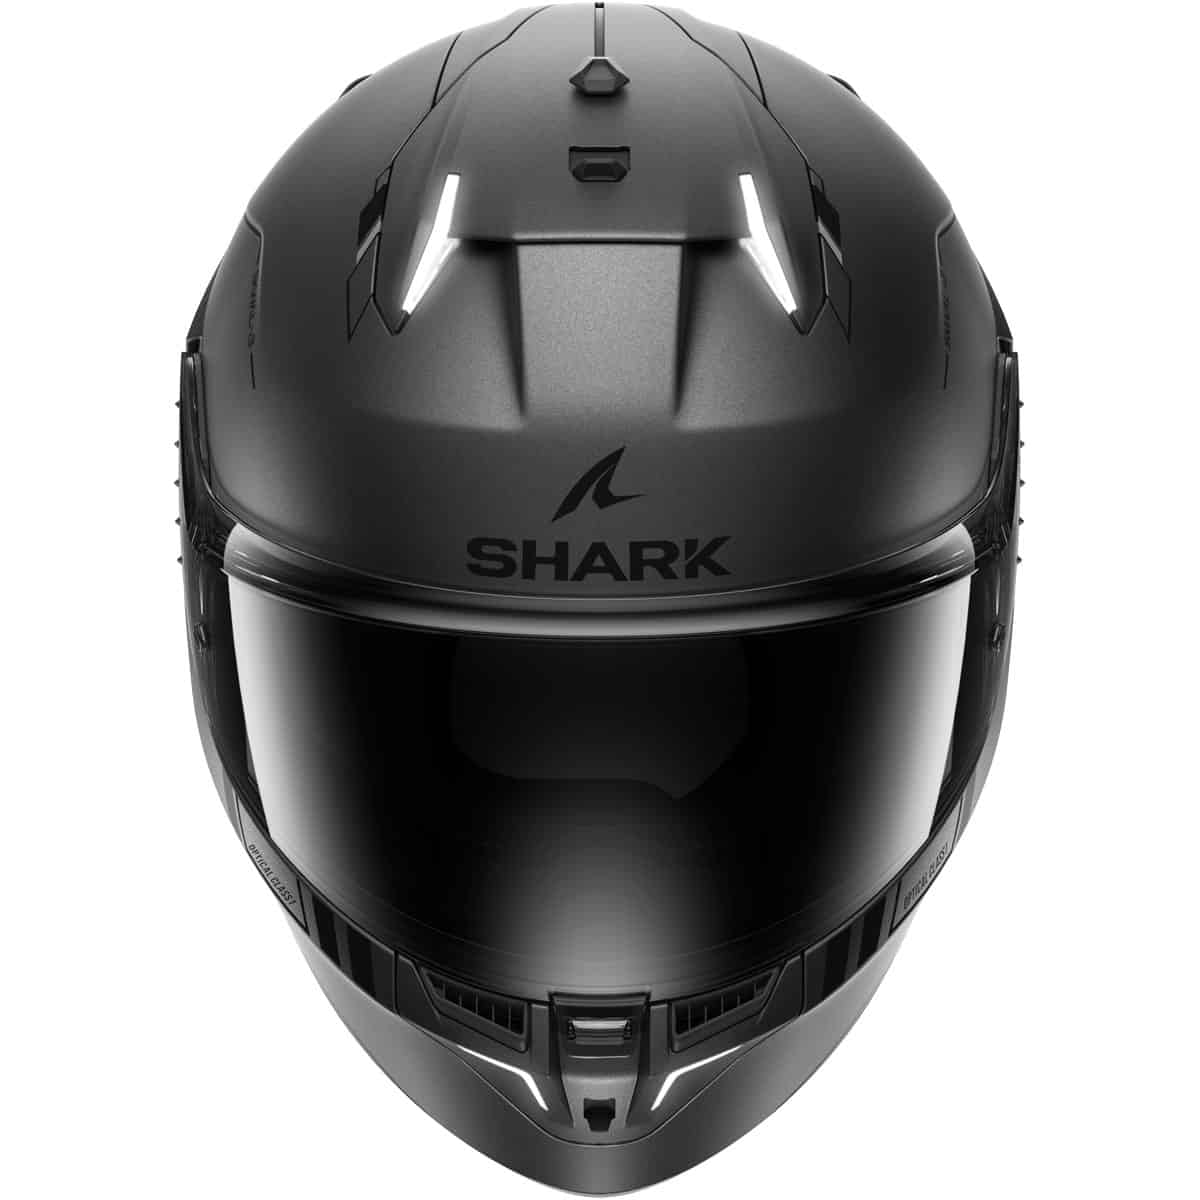 The Shark Skwal i3 helmet is the world's 1st helmet with integrated brake lights. Discover the cutting-edge Shark Skwal i3 helmet: an innovative full face design integrating LED lights that flash rear brake lights on braking, without cables or Bluetooth!  2